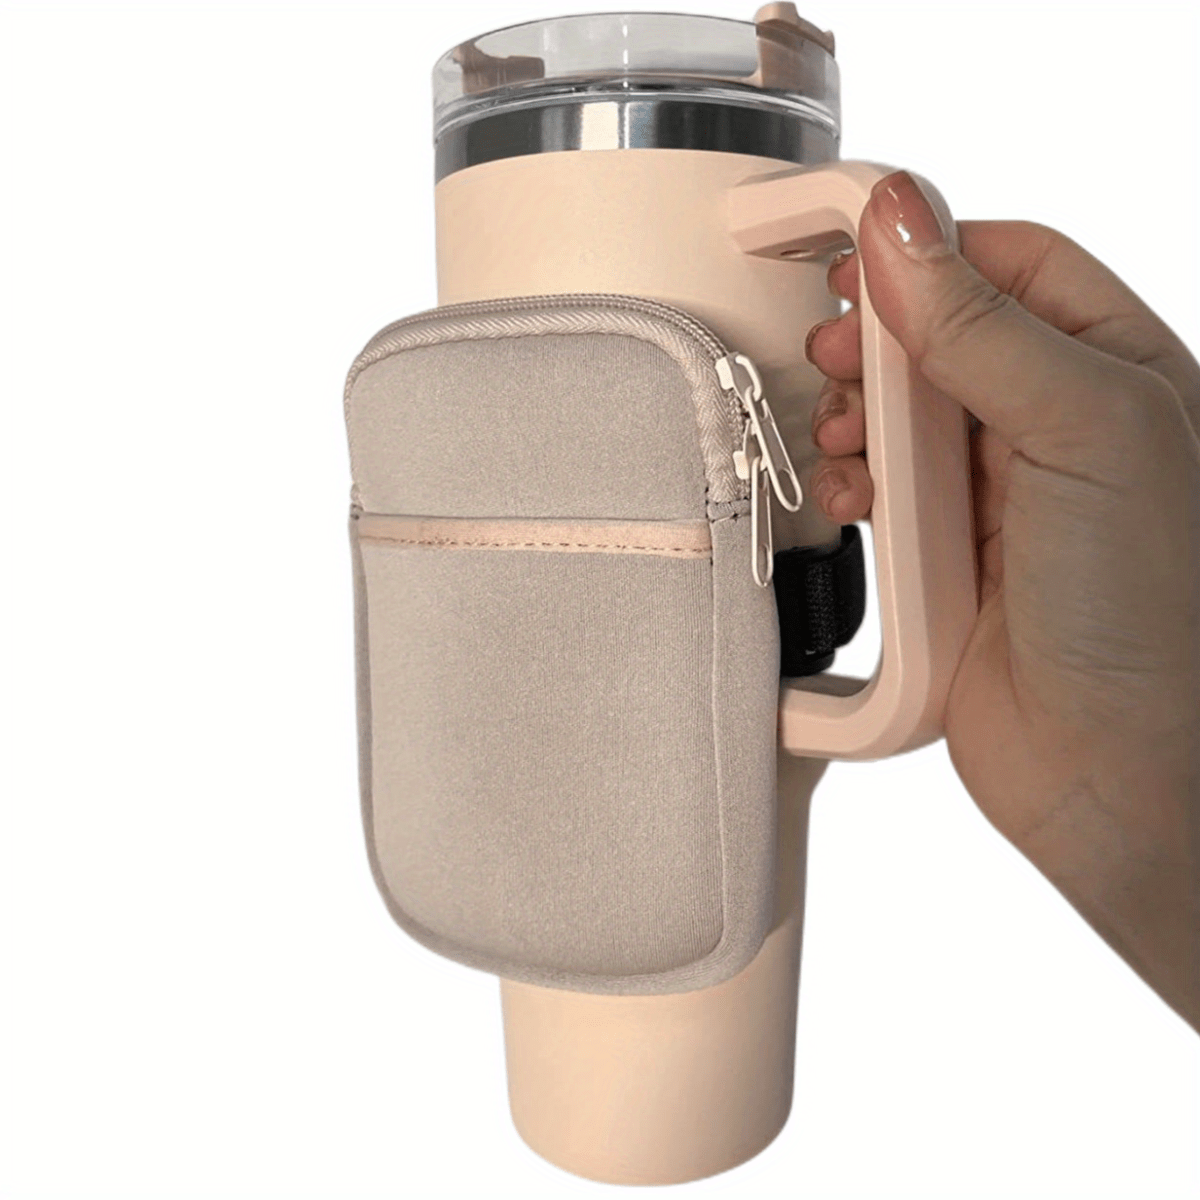 Water Bottle Pouch Compatible With Stanley Tumblers 20oz 30oz 40oz Mugs Cups  with Adjustable Strap Water Cup Go Out Portable Bag, Arm Wrist Storage Bag  with Pocket for Cards, Keys, Wallet, Earphone